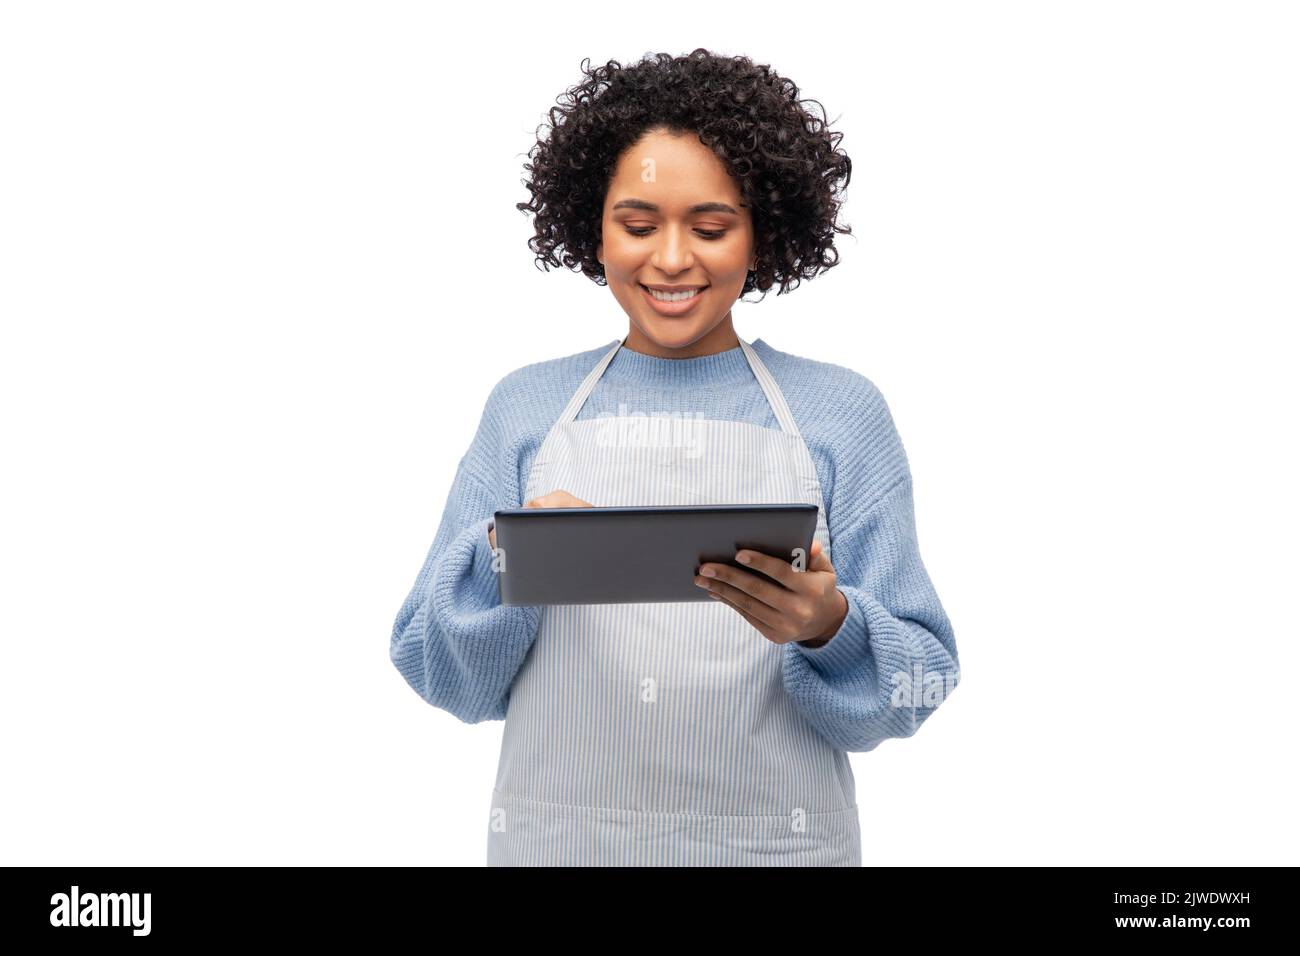 smiling woman in apron with tablet pc computer Stock Photo